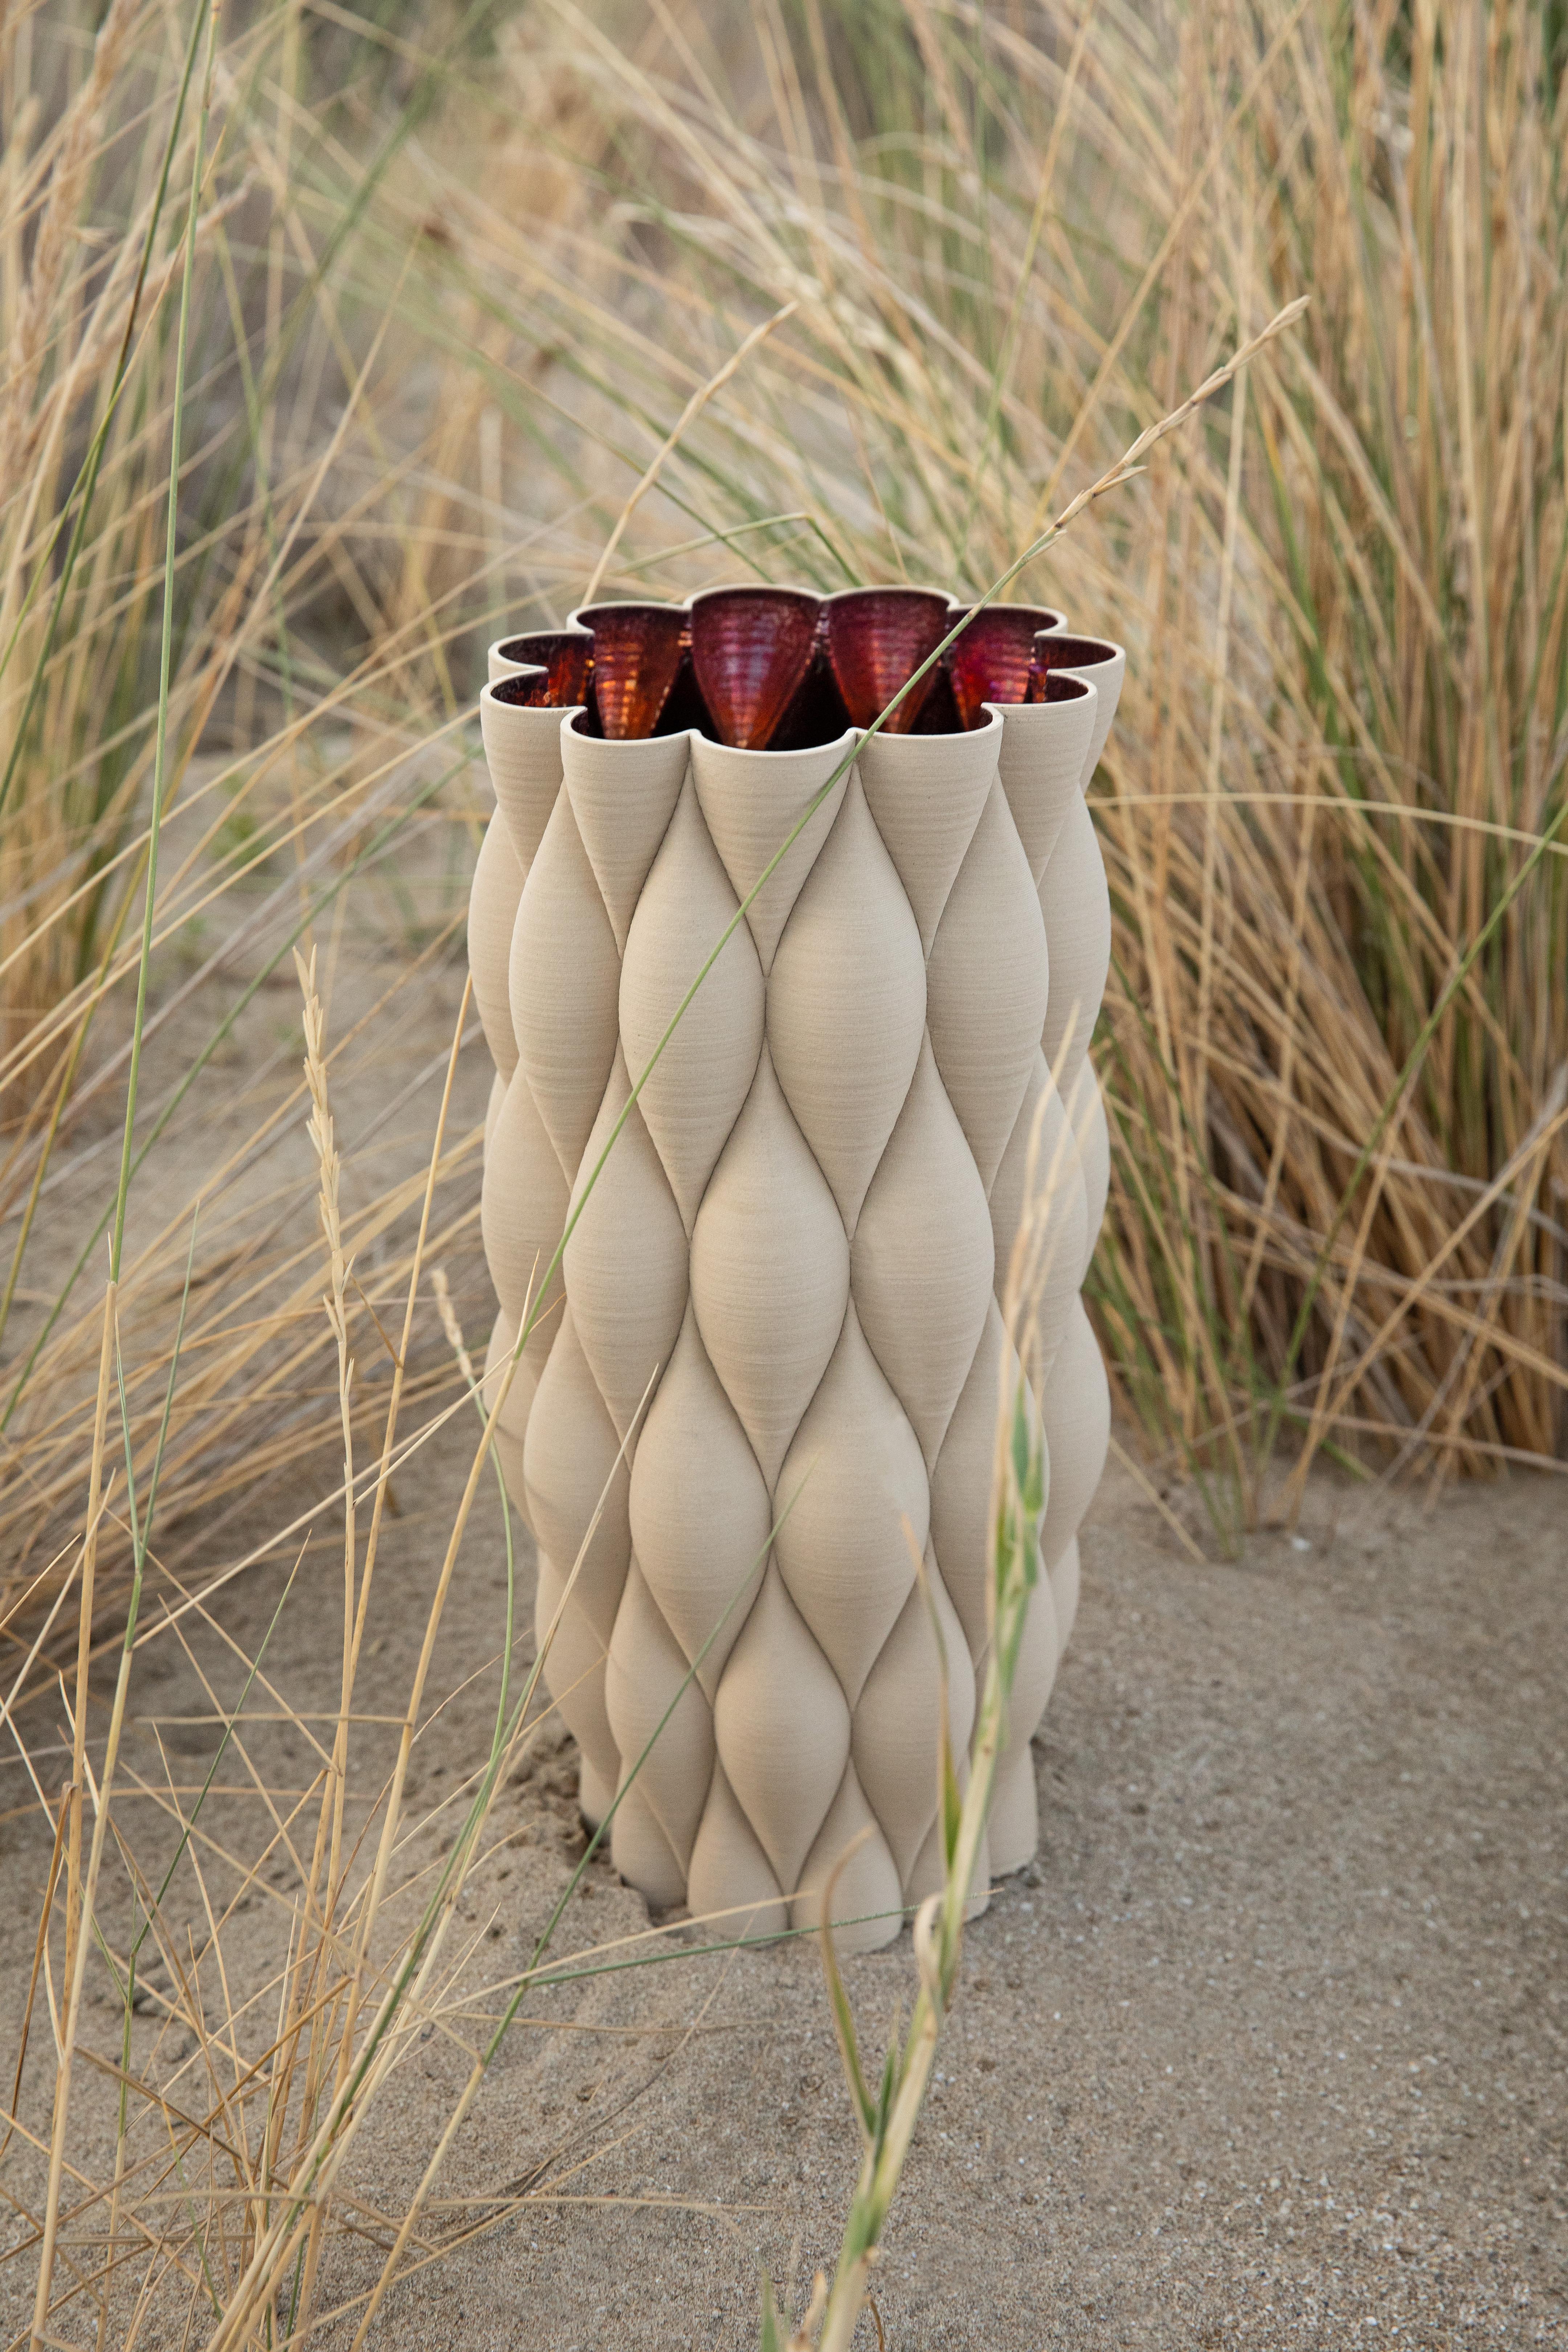 The New Delhi is part of the Mitti Vases collection, presented at the Milan Design Week Fuorisalone 2021 edition and created after a long trip to India. 
The collection explores different palettes and surfaces, using unfinished stoneware that feels